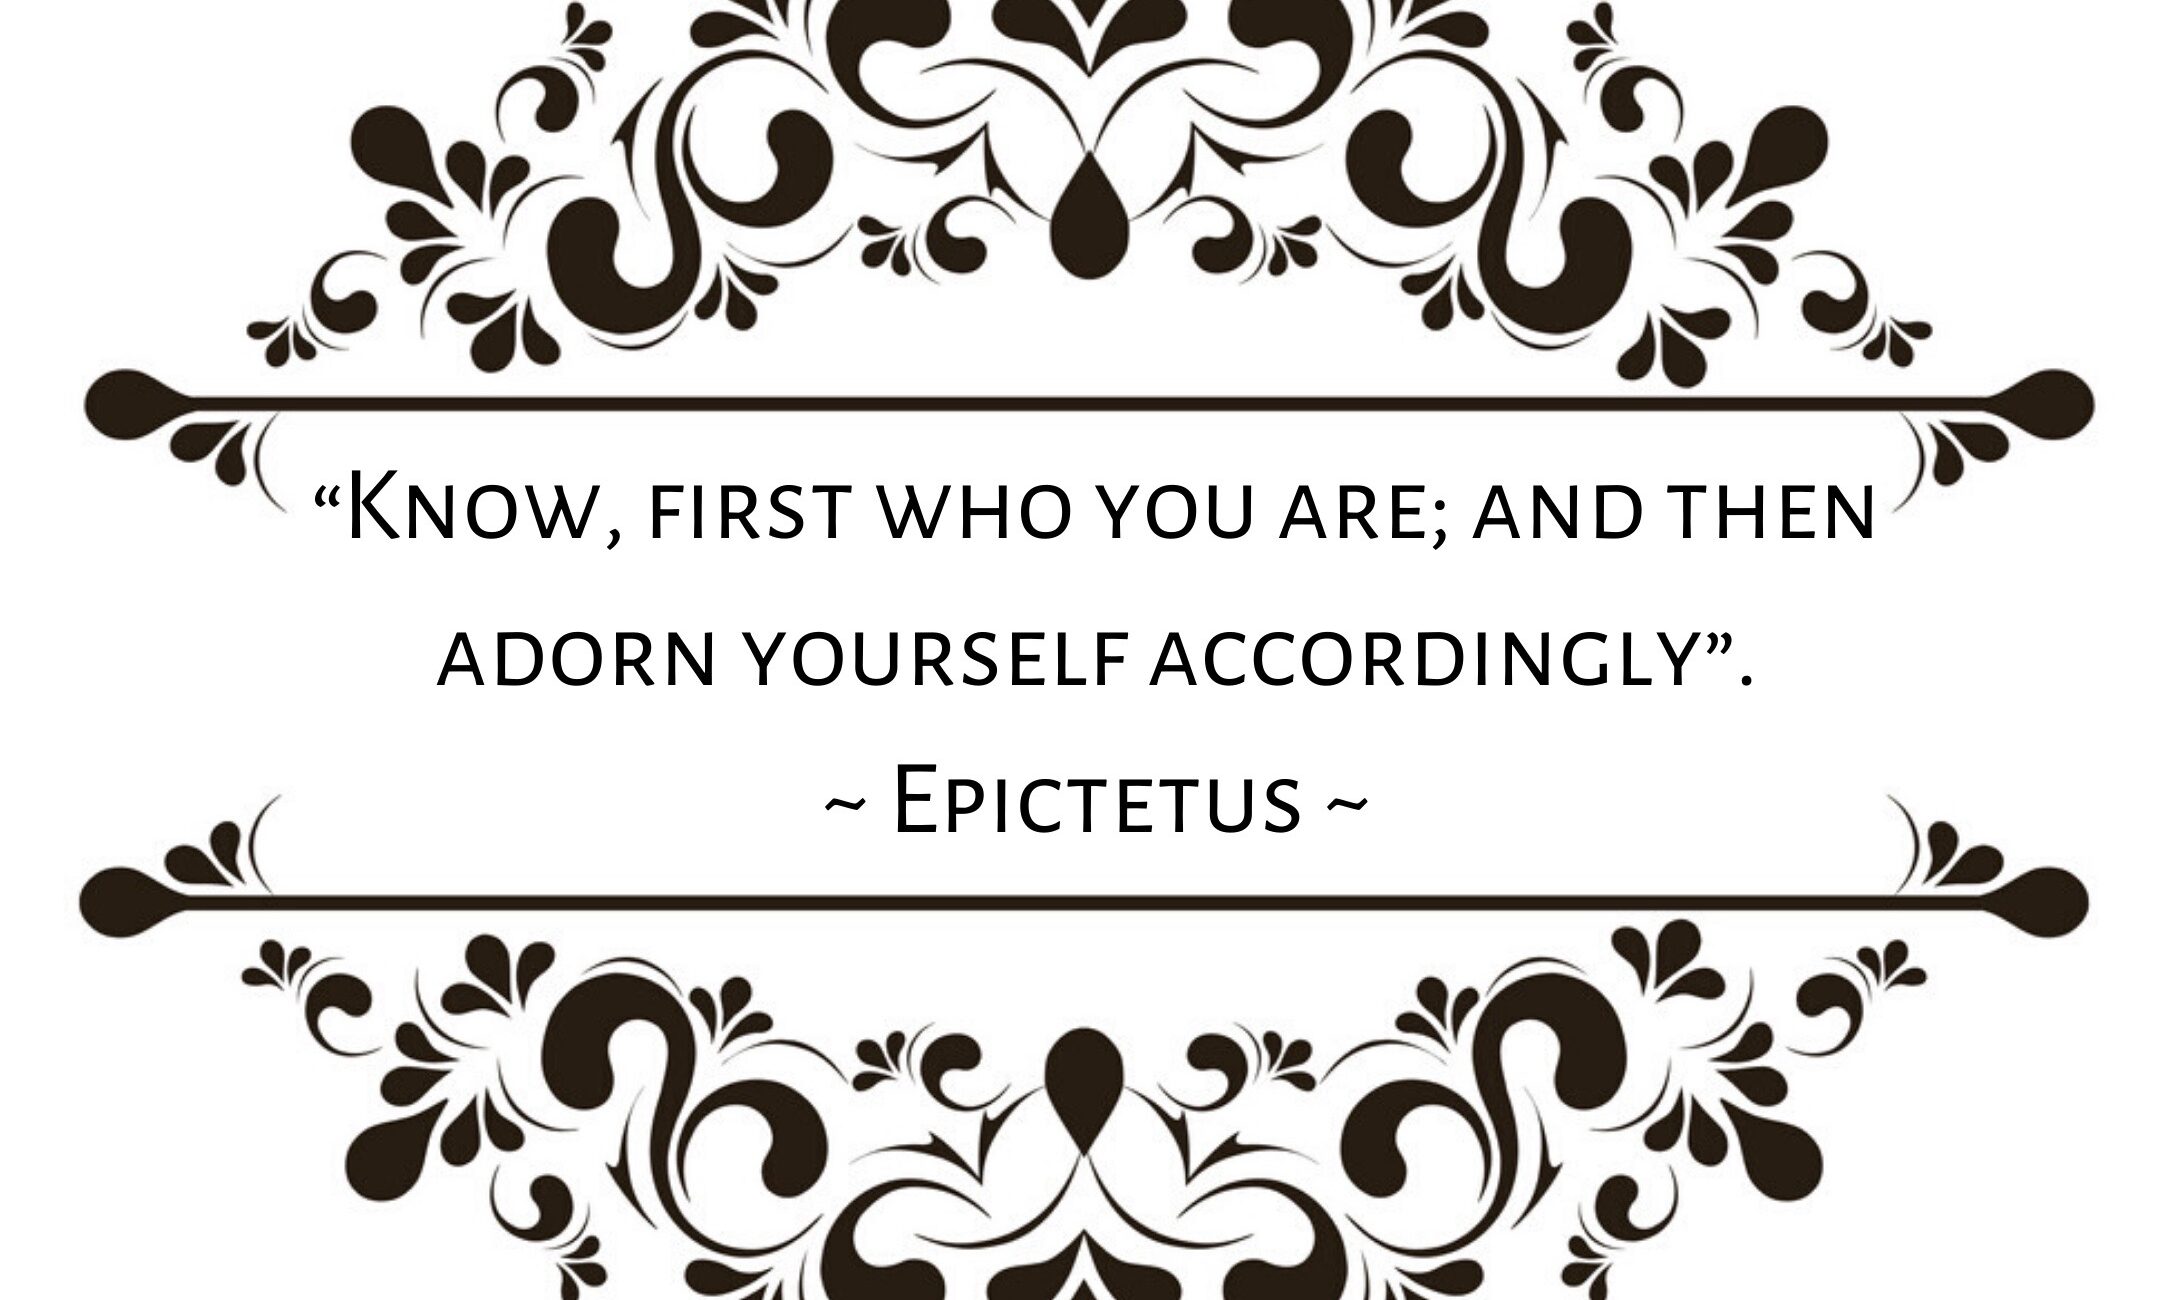 know-first-who-you-are-and-then-adorn-yourself-accordingly-epictetus-style-tip-with-good-looks-bible-glb-by-jehan-mir-small-image